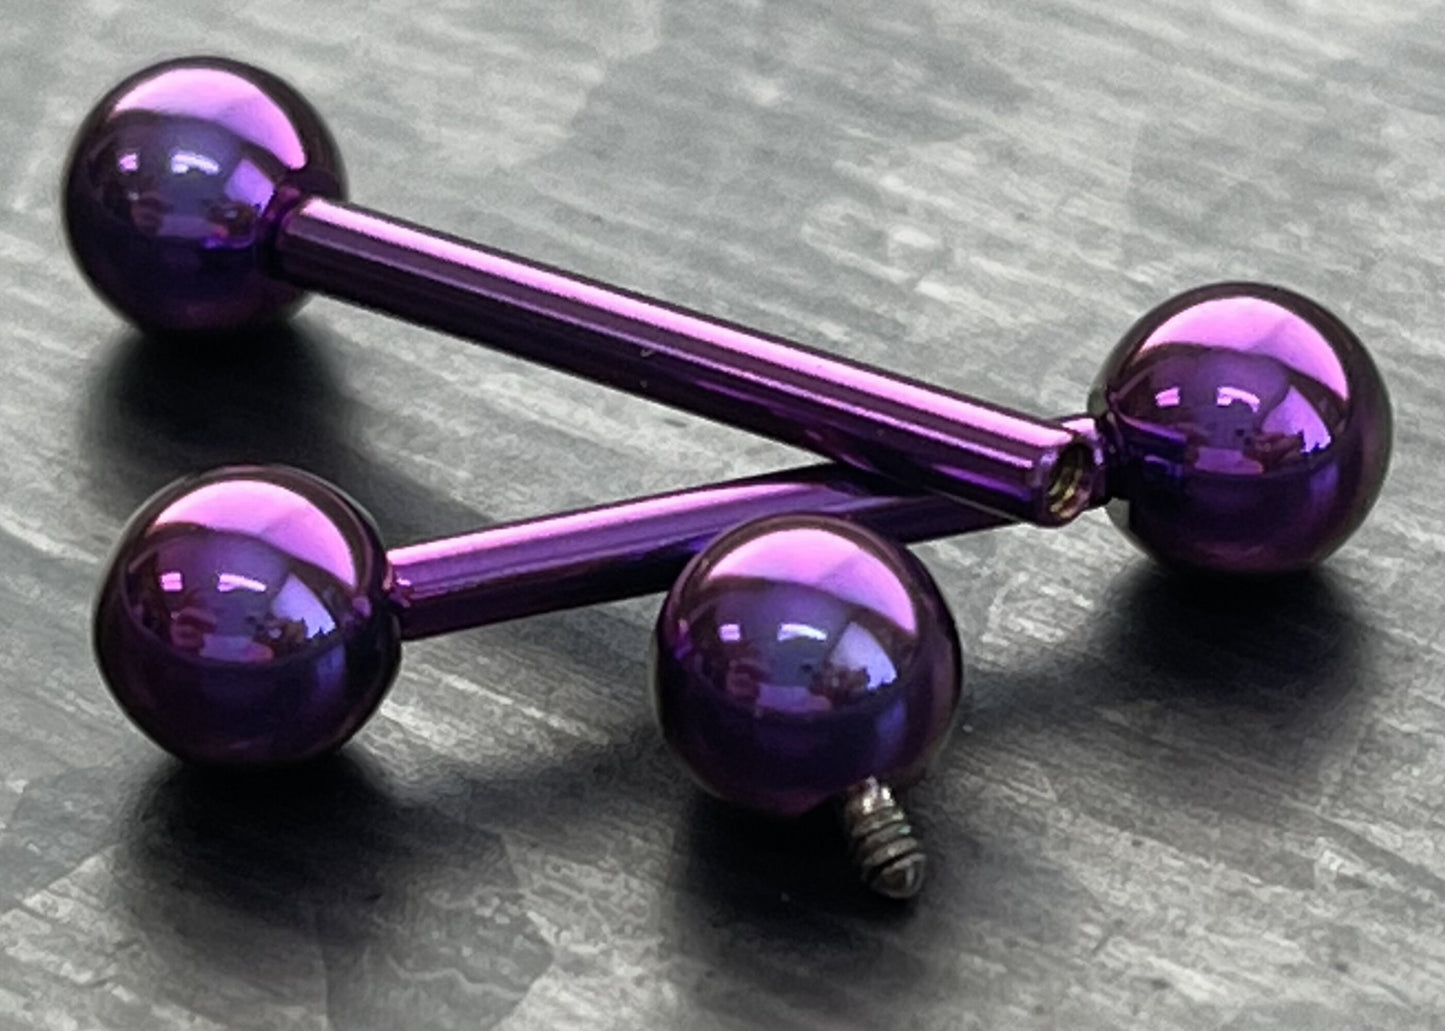 1 Piece of Implant Grade Titanium Internally Threaded Industrial Barbell - Tongue - 14g - Wearable Length 12mm or 16mm, 7 Colors Available!